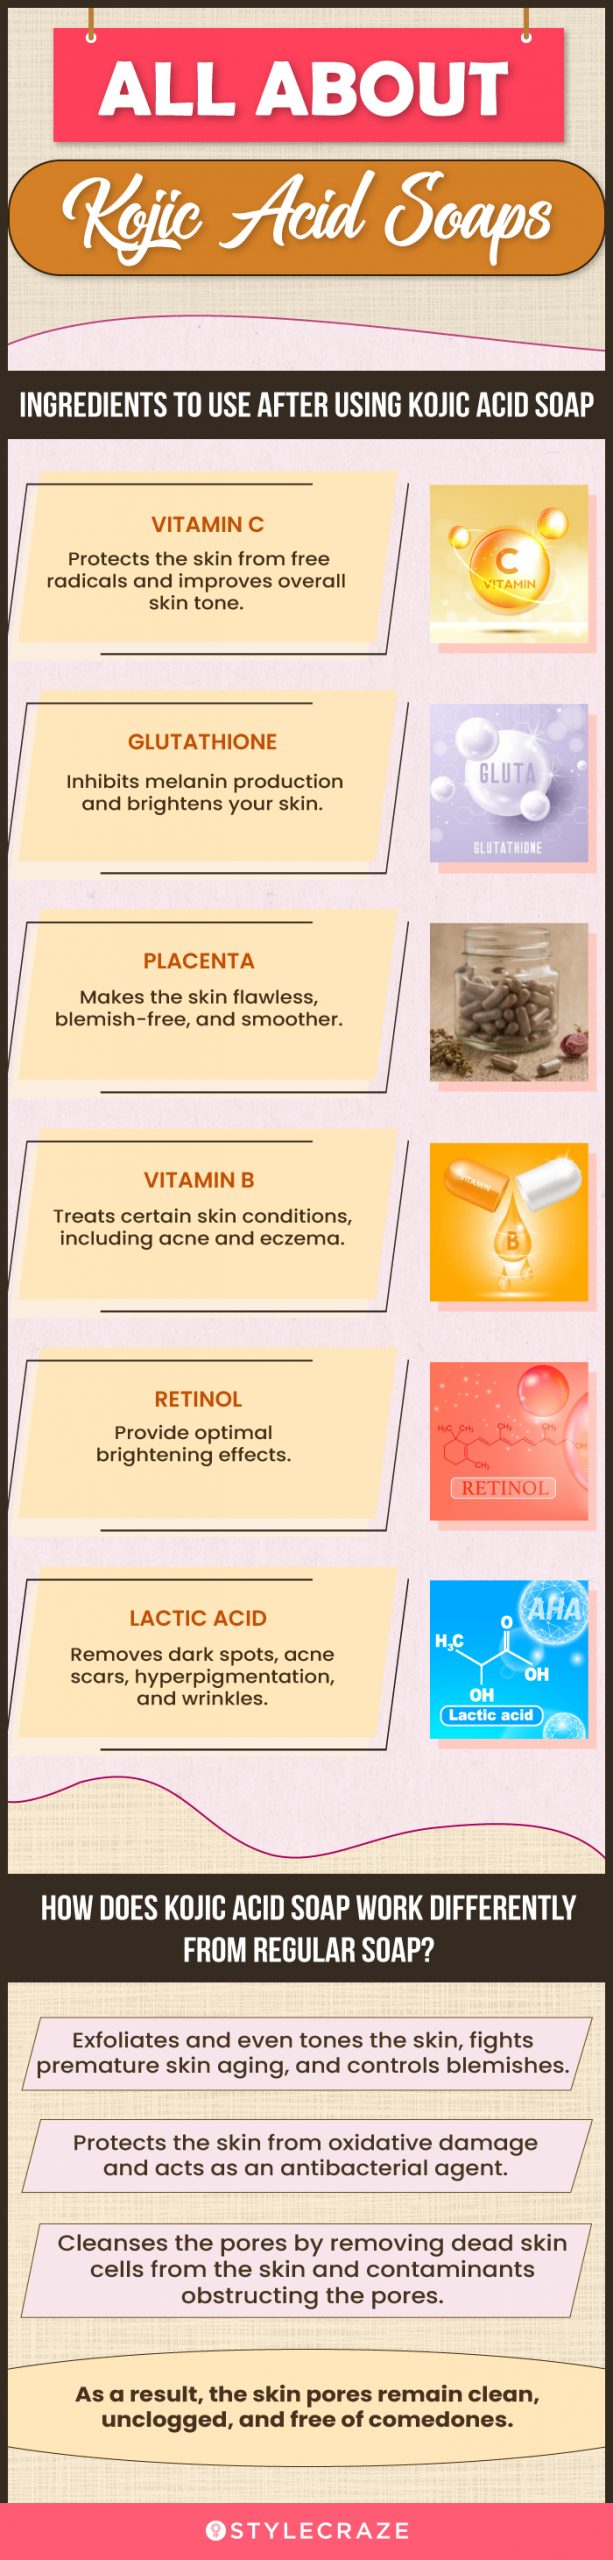 All About Kojic Acid Soaps (infographic)